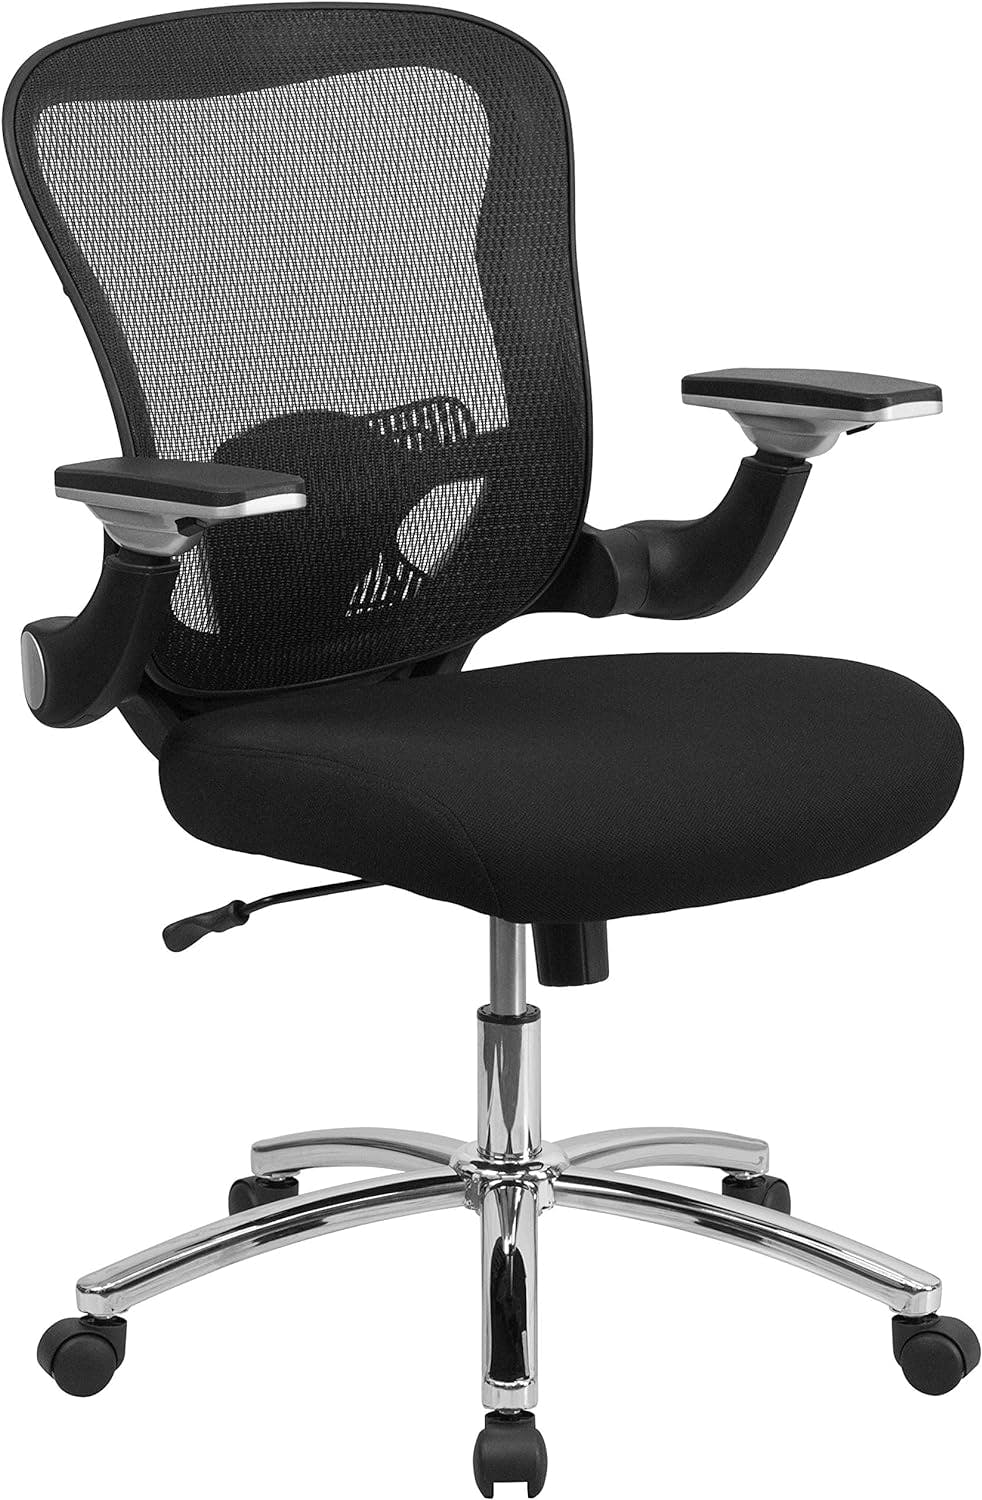 Sam Mid-Back Black Mesh Executive Chair with Adjustable Swivel Arms